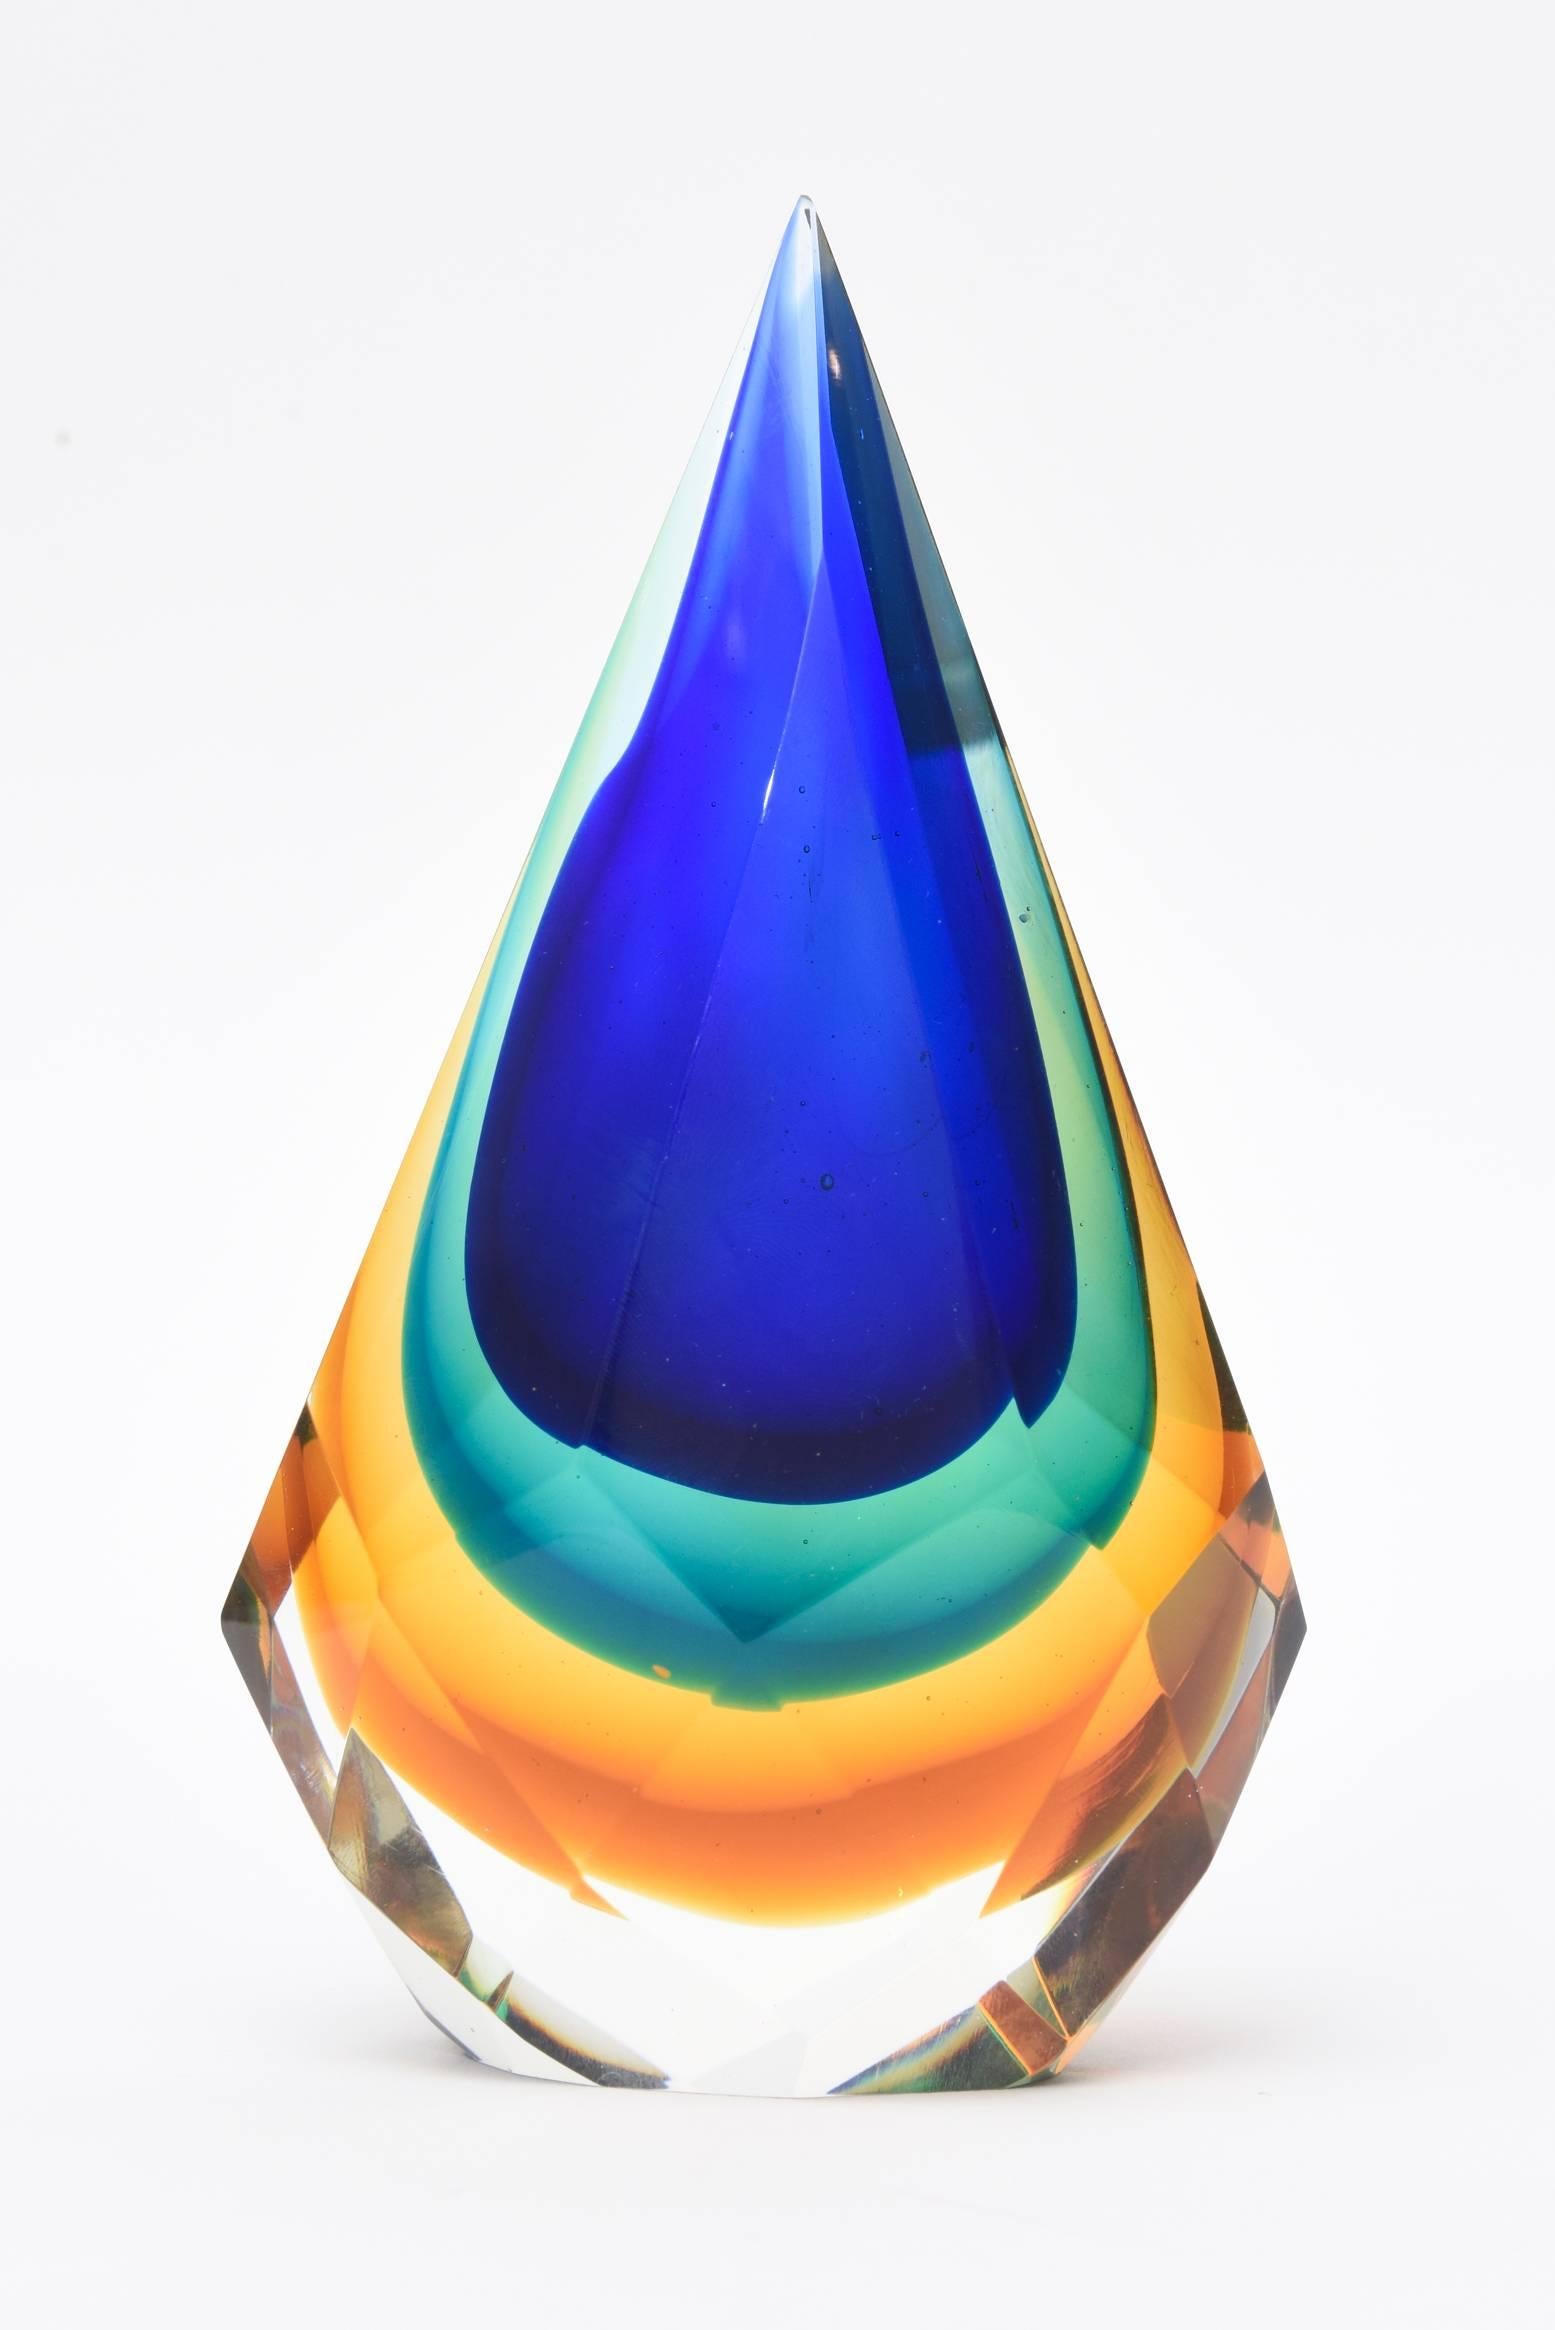 This stunning teardrop shaped Italian Murano diamond faceted Sommerso glass sculpture/ paperweight/ desk accessory is most unusual. The layers of brilliant colors are cobalt blue, emerald green, amber to yellow to clear. The diamond faceted forms